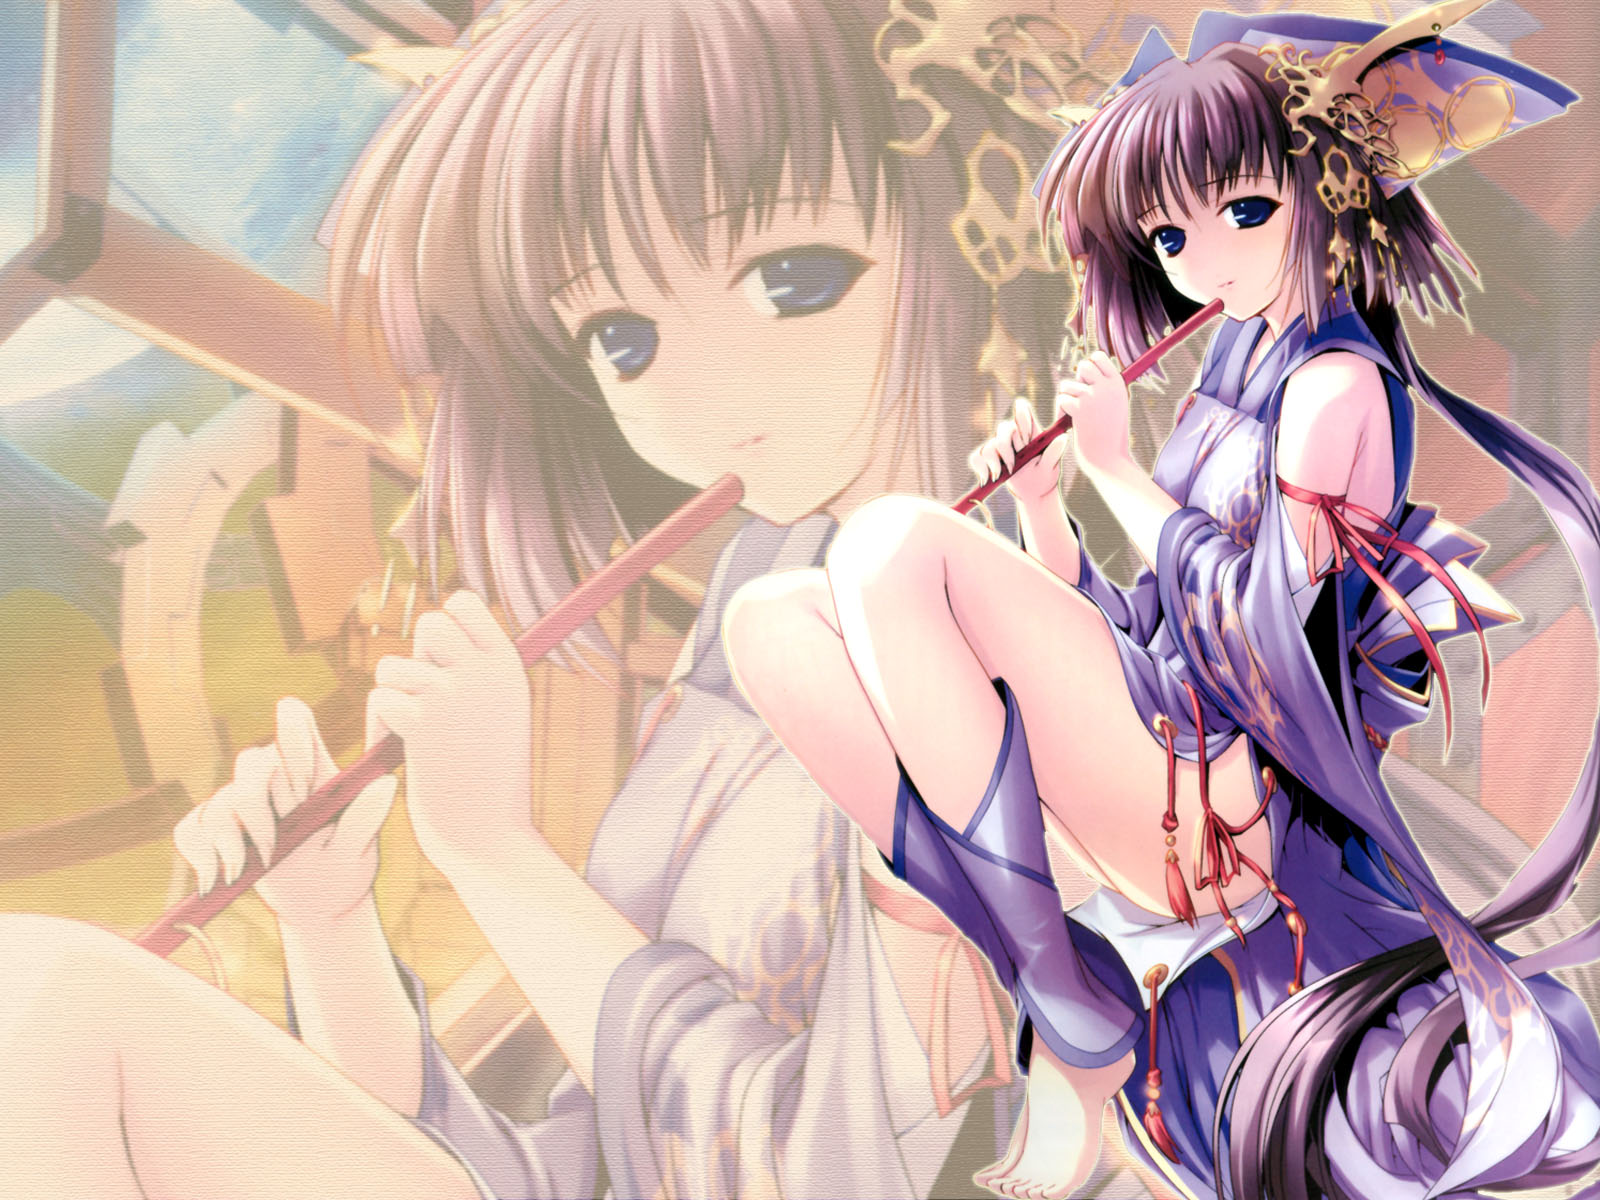 Image Gallary 1 Beautiful Anime Wallpapers for Desktop 1600x1200